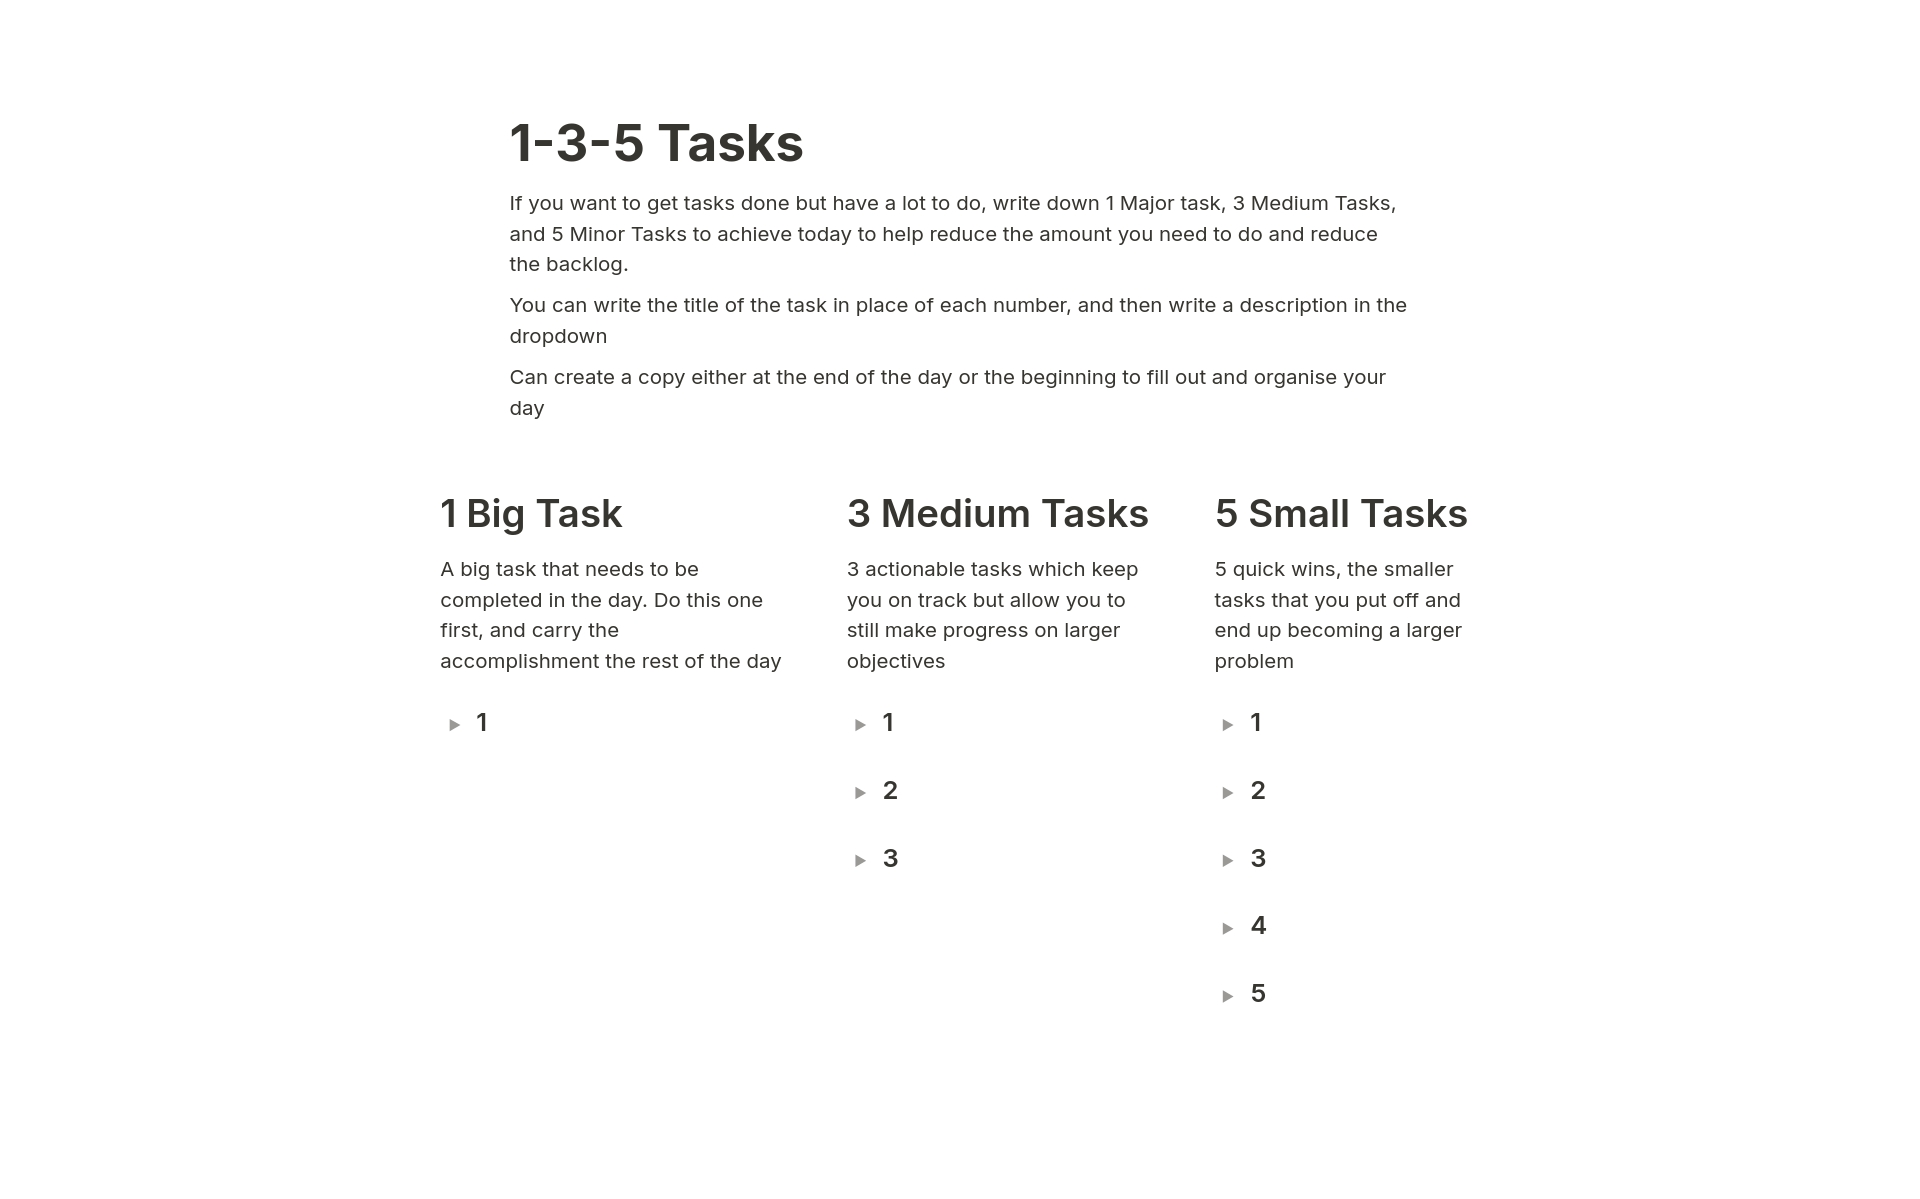 1-3-5 Tasks to help you increase your daily productivity if you have a lot to do and don't know where to start